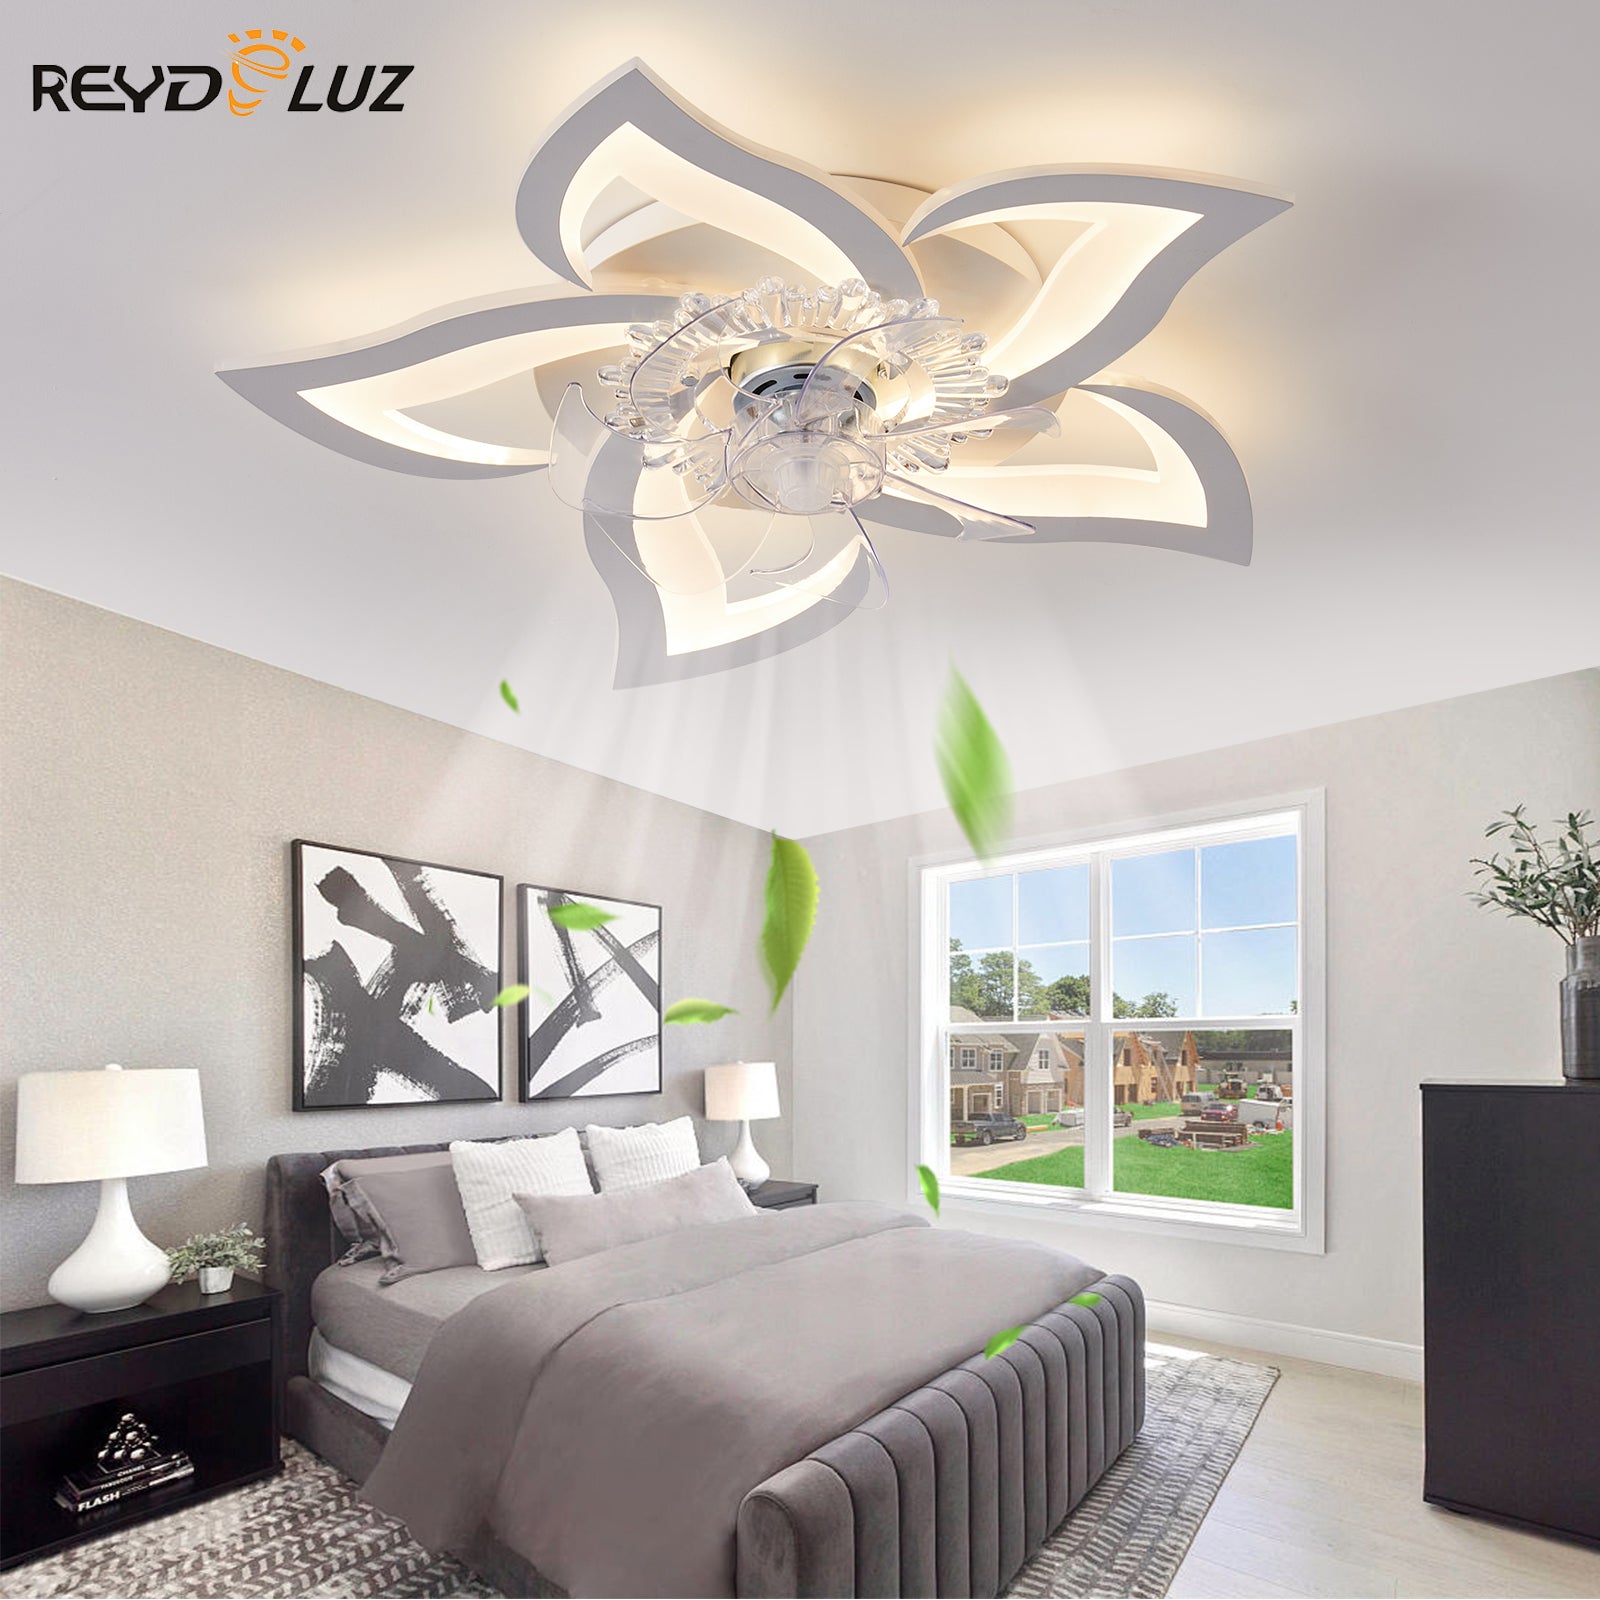 REYDELUZ Low Profile Ceiling Fan with Lights,Modern Dimmable Flower Shape Ceiling Light Fan with Remote Control/App Control,for Bedroom/Children's Room.